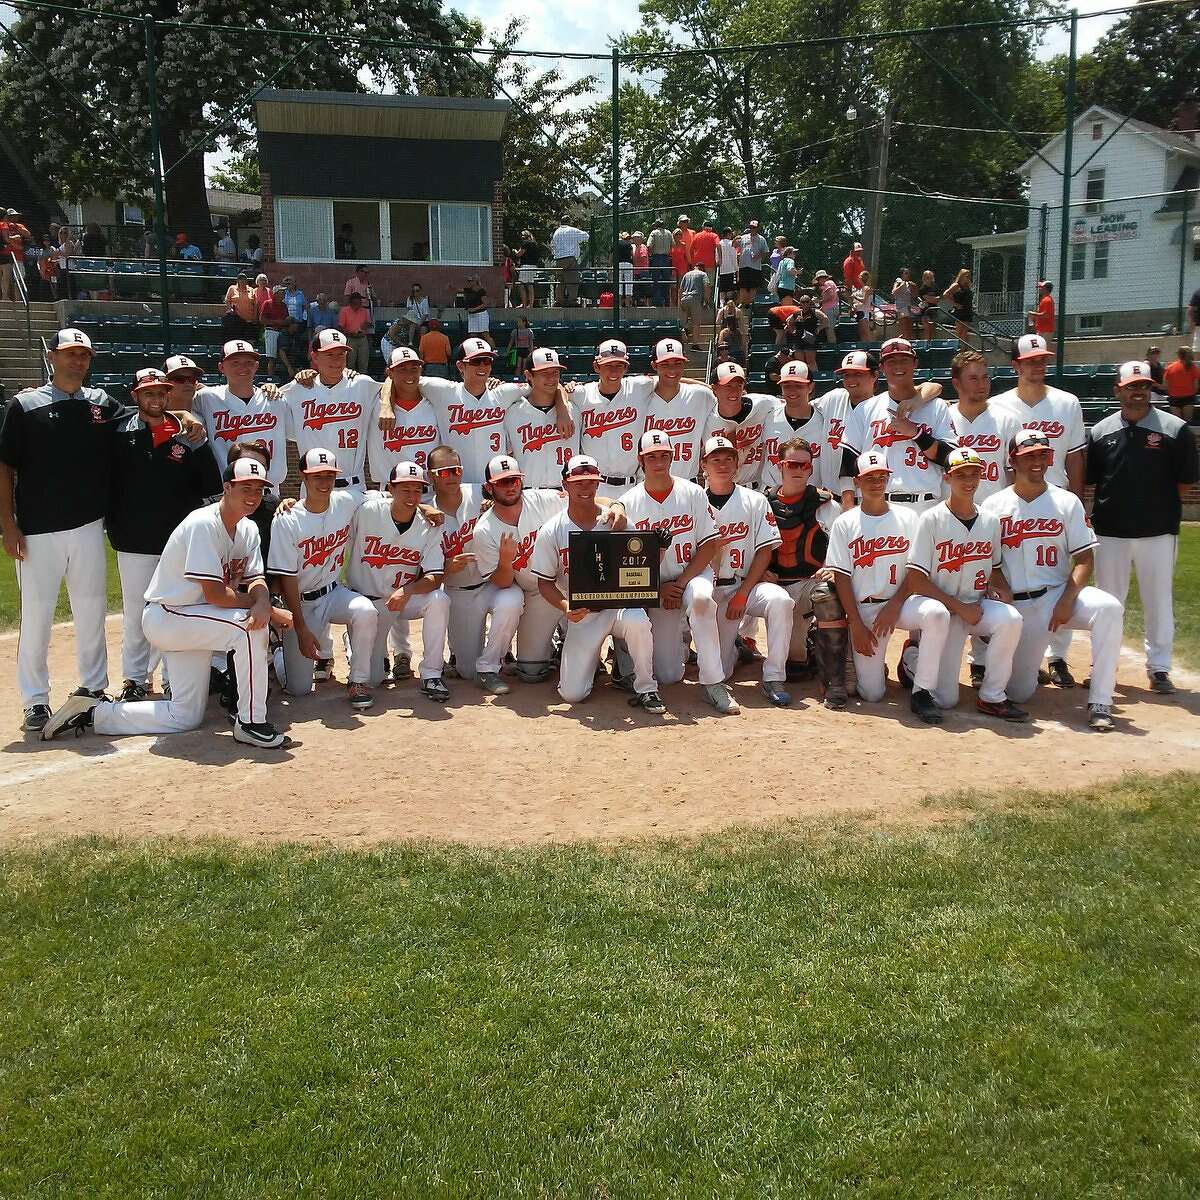 The Edwardsville Tigers pose with the championship plaque after beating Normal West on Saturday in the title game of the Class 4A Bloomington (Illinois Wesleyan) Sectional.